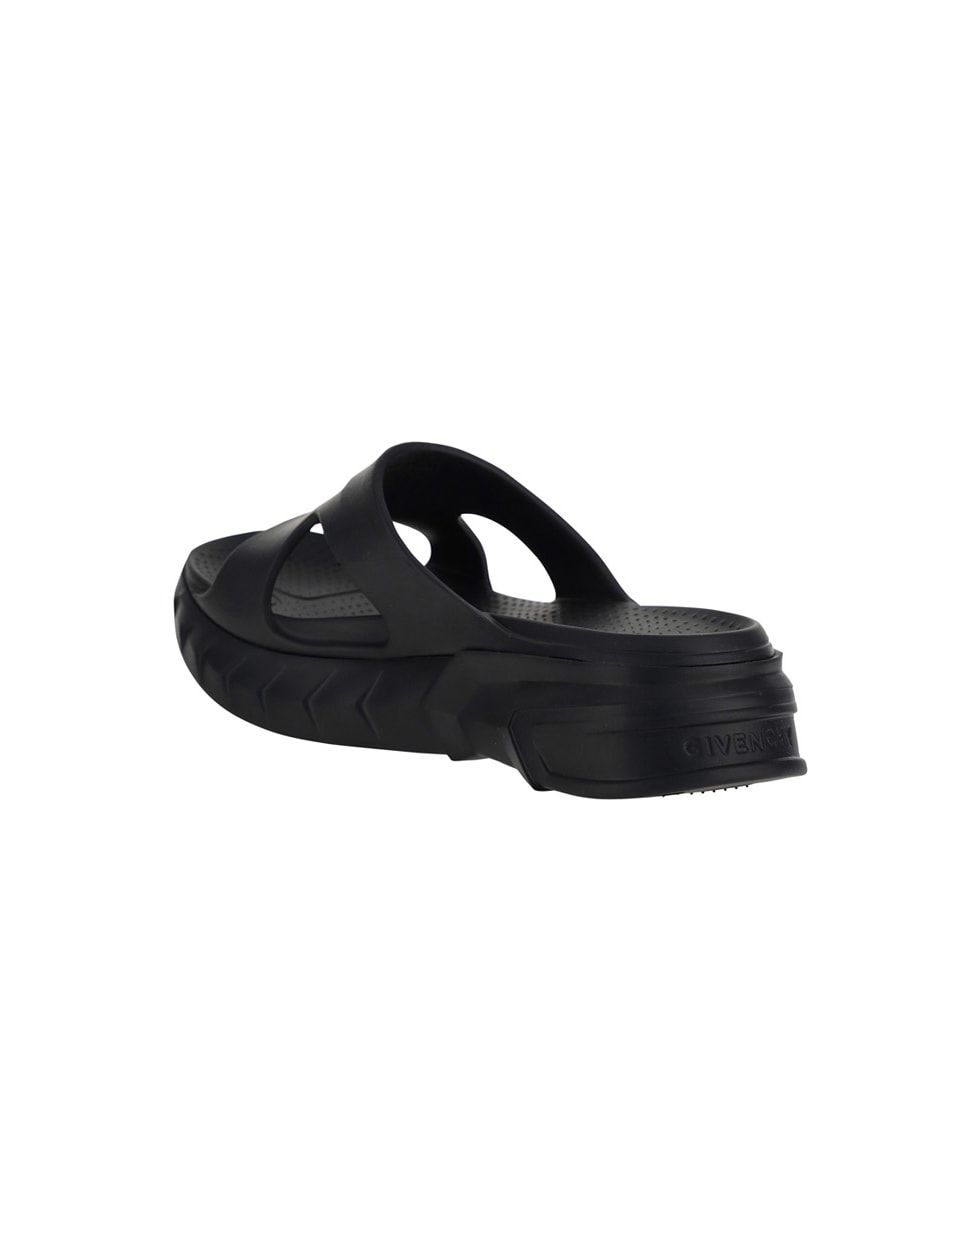 Givenchy Marshmallow Sandals - Black